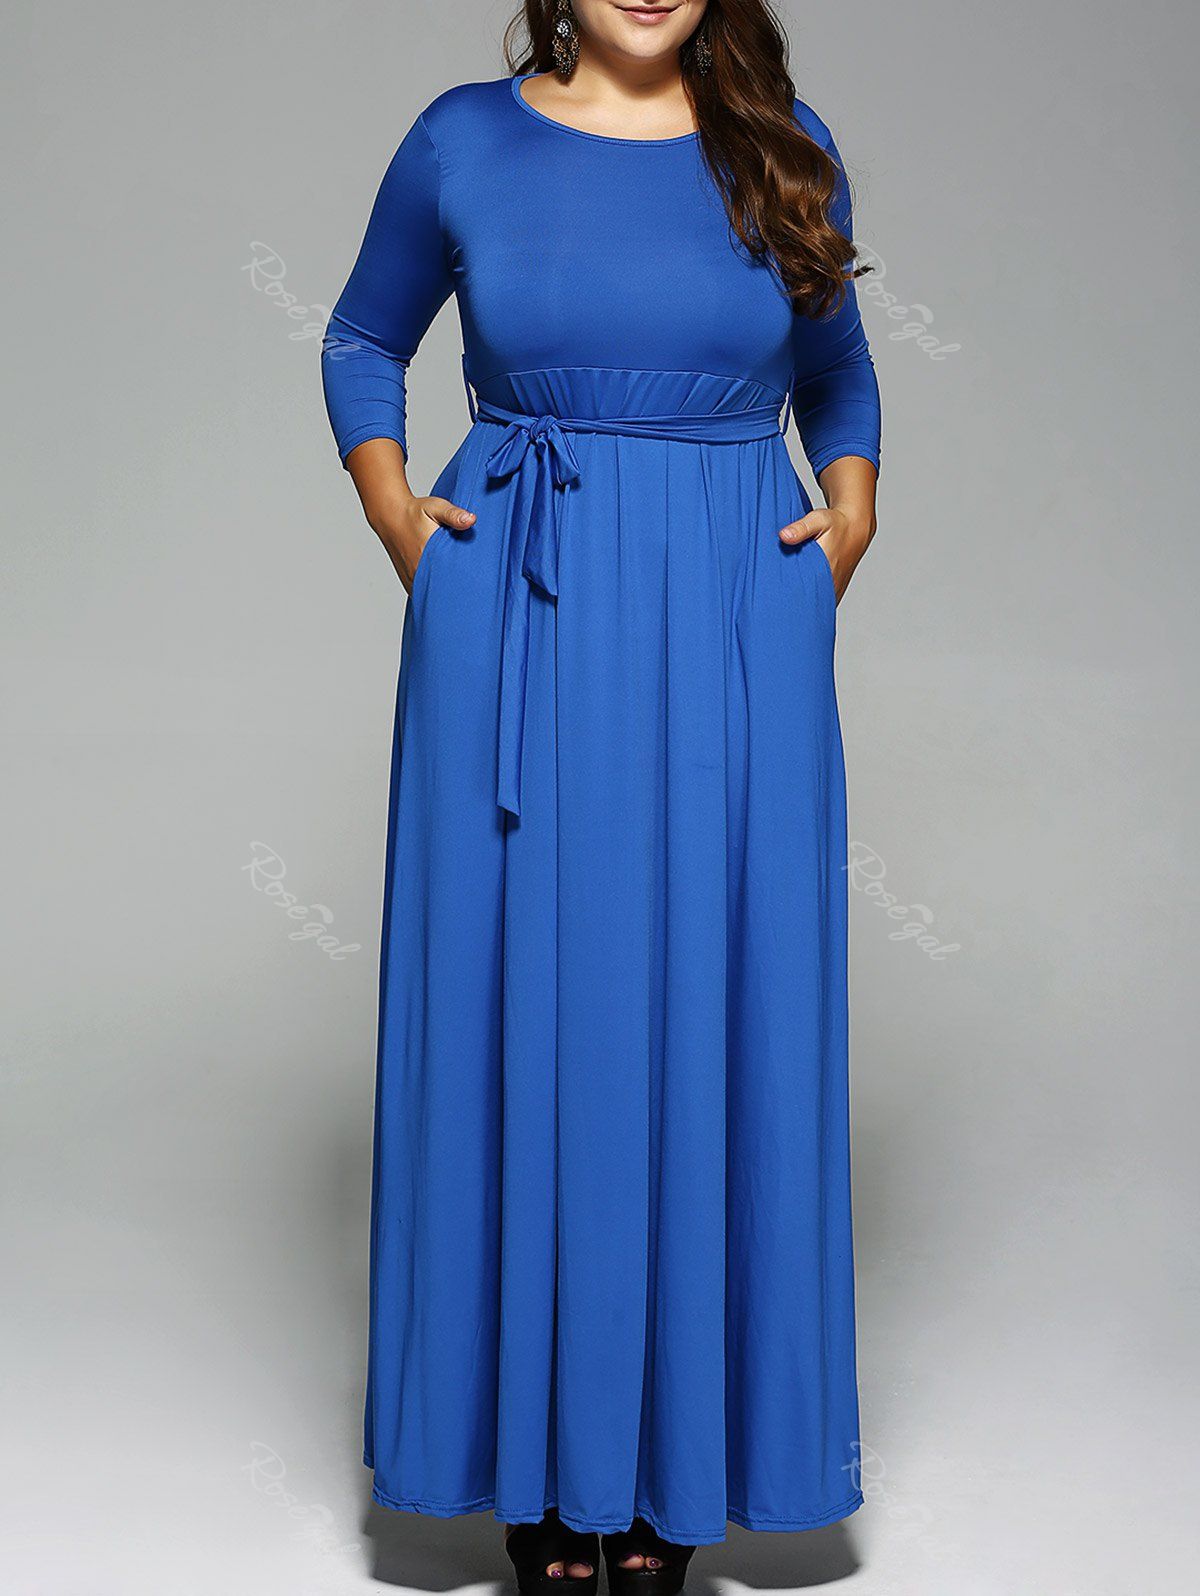 [30% OFF] Plus Size Long Sleeve Maxi Formal A Line Evening Swing Dress ...